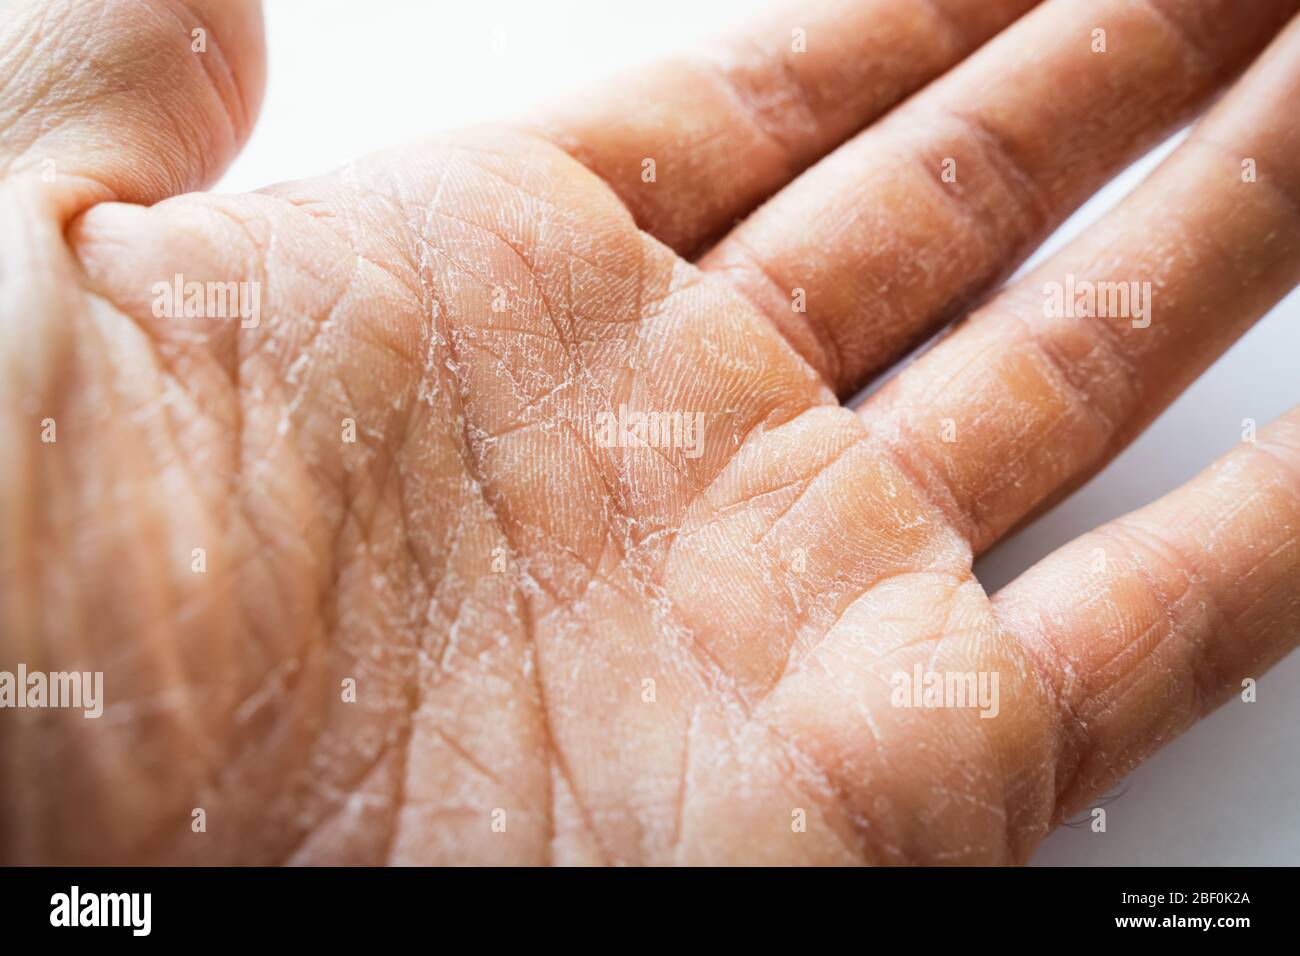 Dry Man Hand With Skin Peeling Off Stock Photo